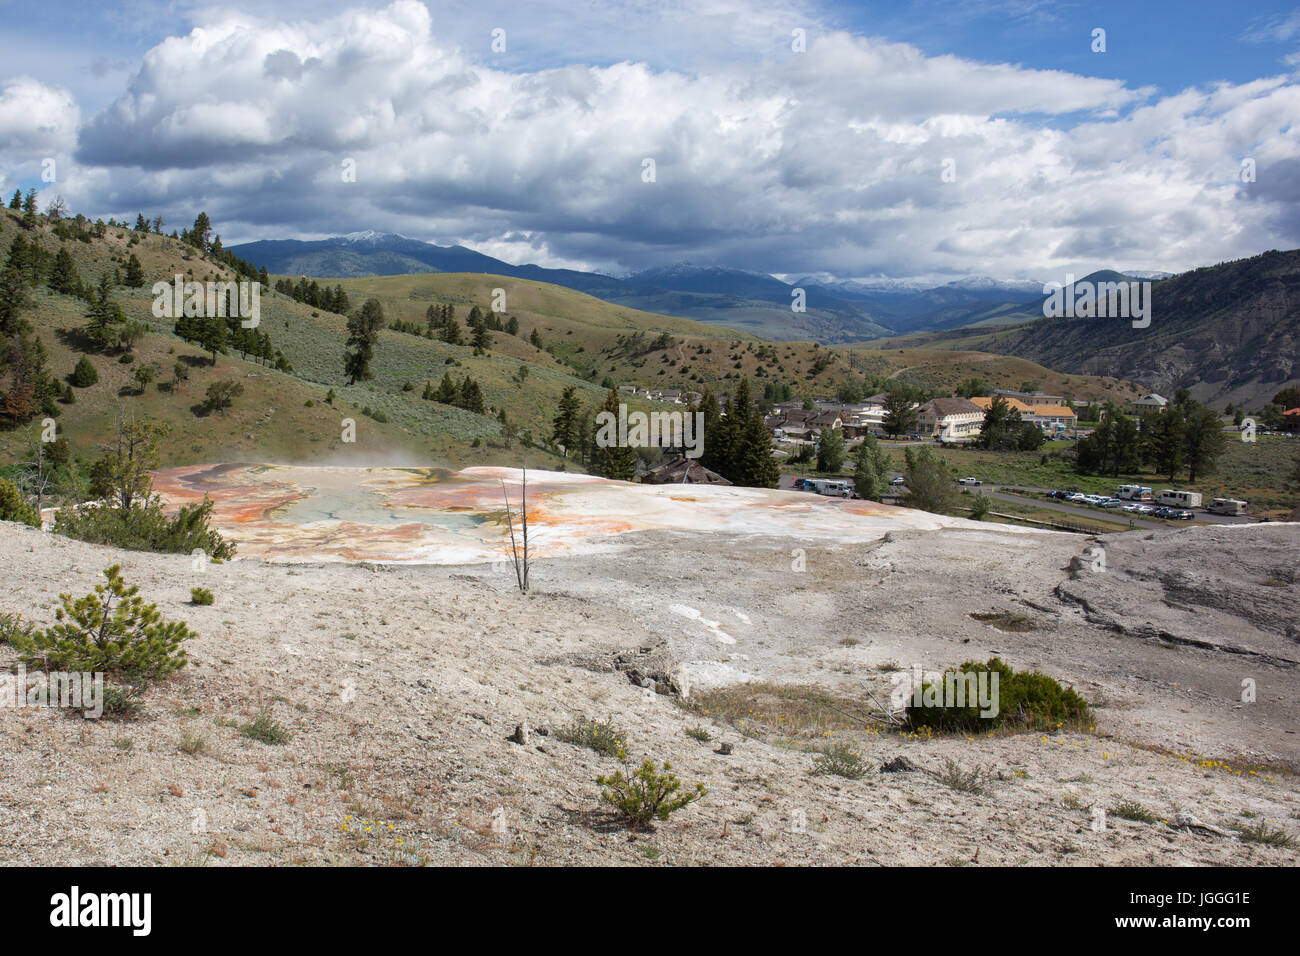 Top of Palette Spring with the town of Mammoth Hot Springs in the background, Yellowstone National Park Stock Photo